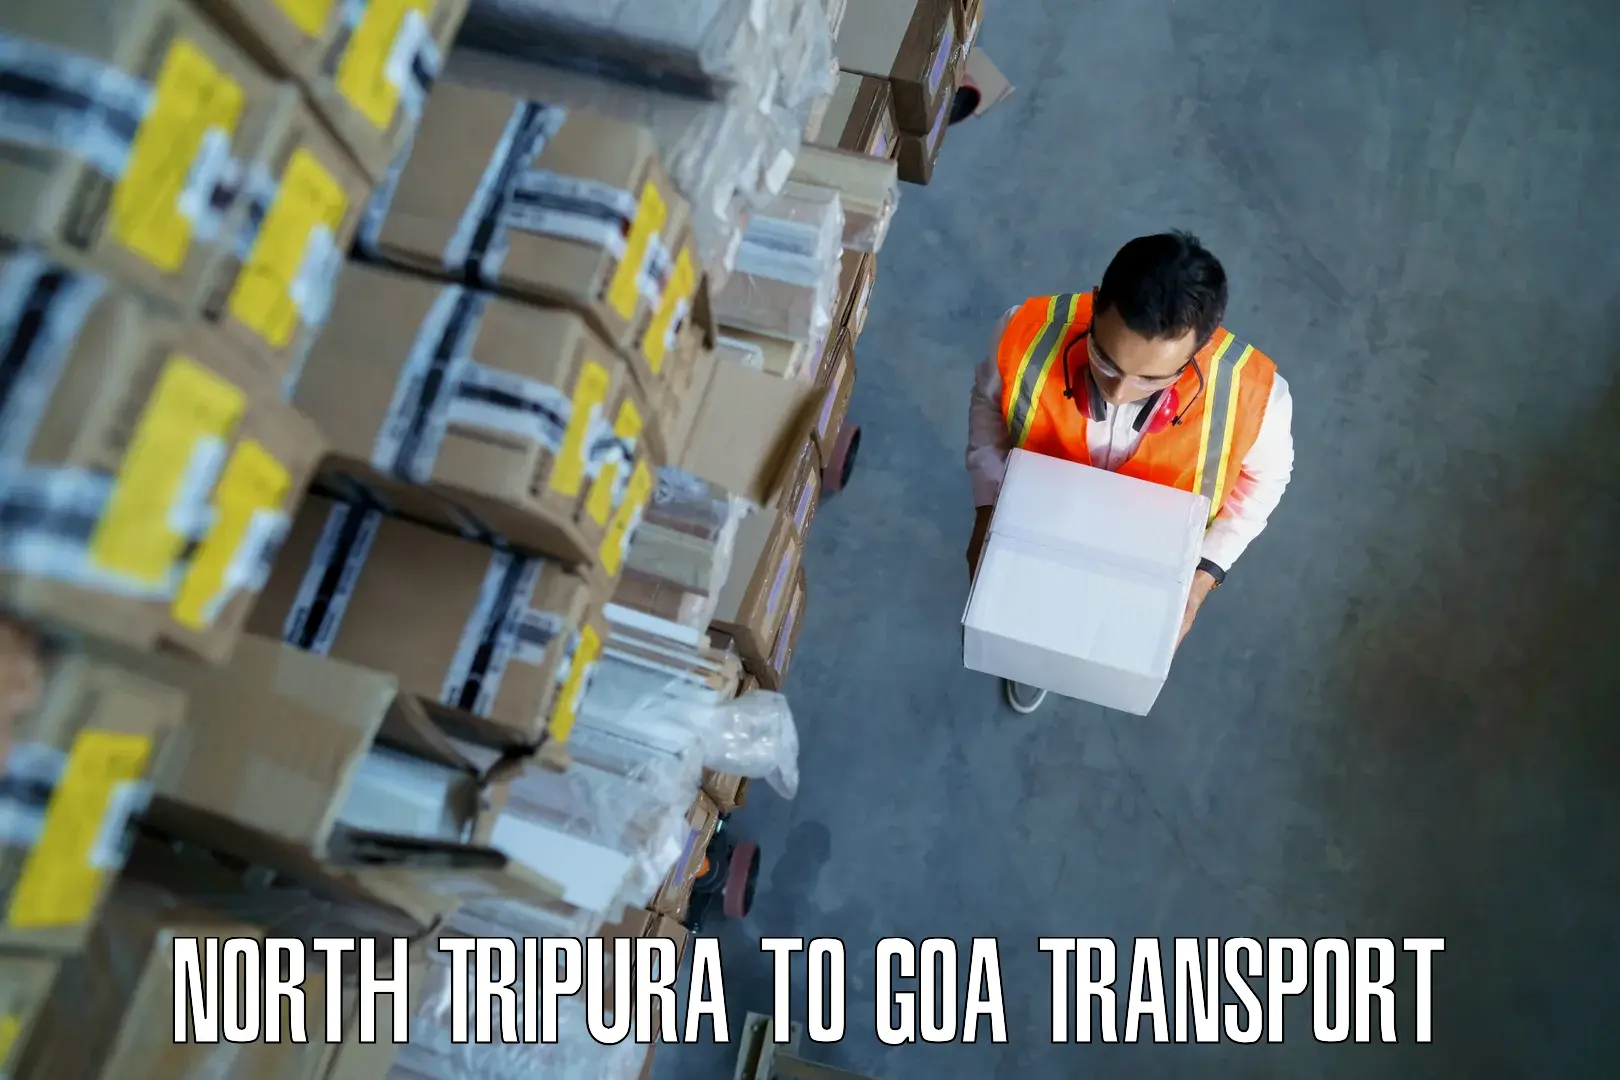 Container transport service North Tripura to Bardez